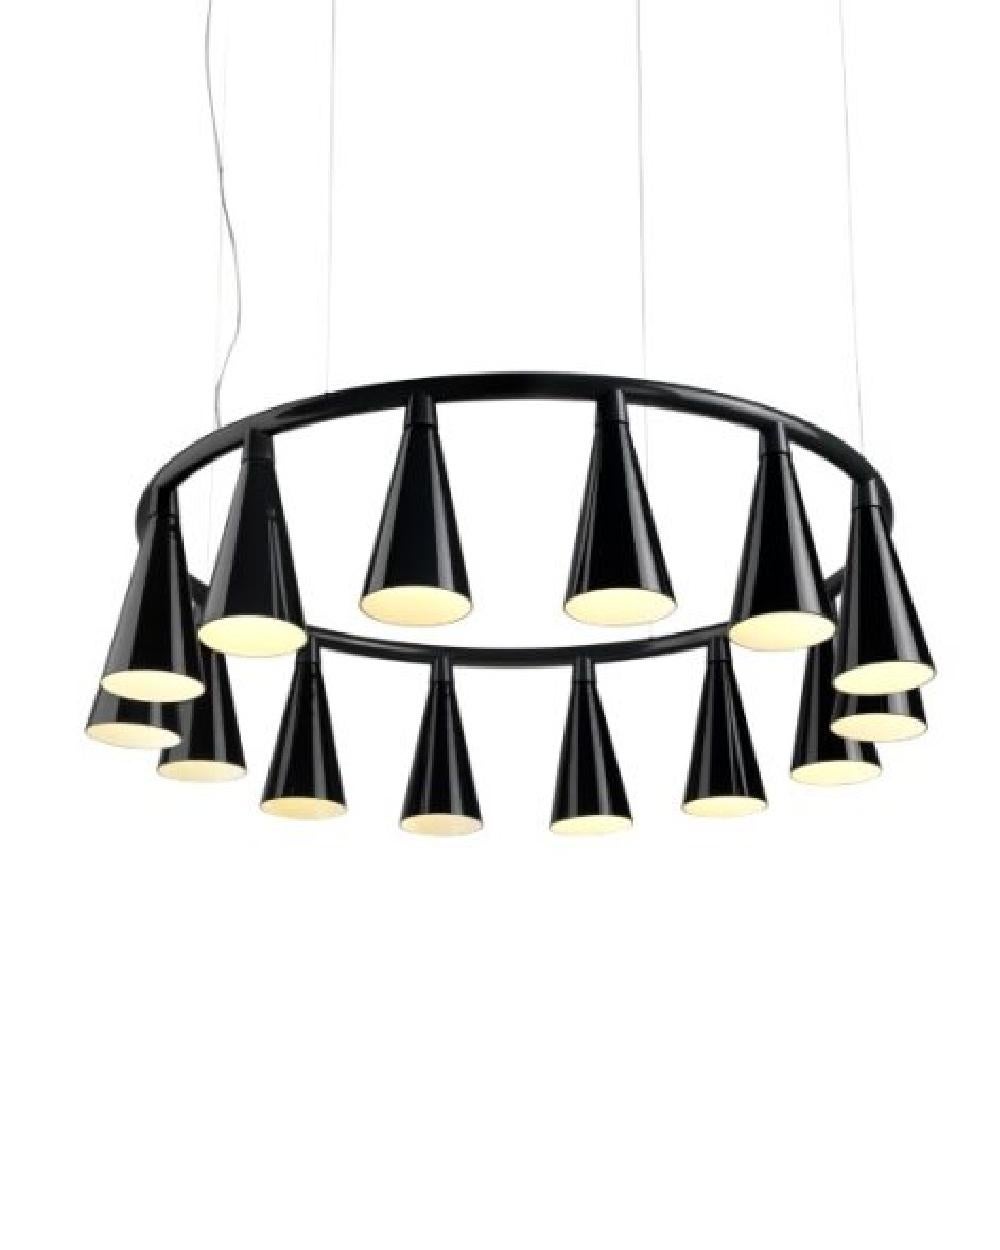 KOMORI R14 chandelier by Nendo for Wonderglass In New Condition For Sale In Brooklyn, NY